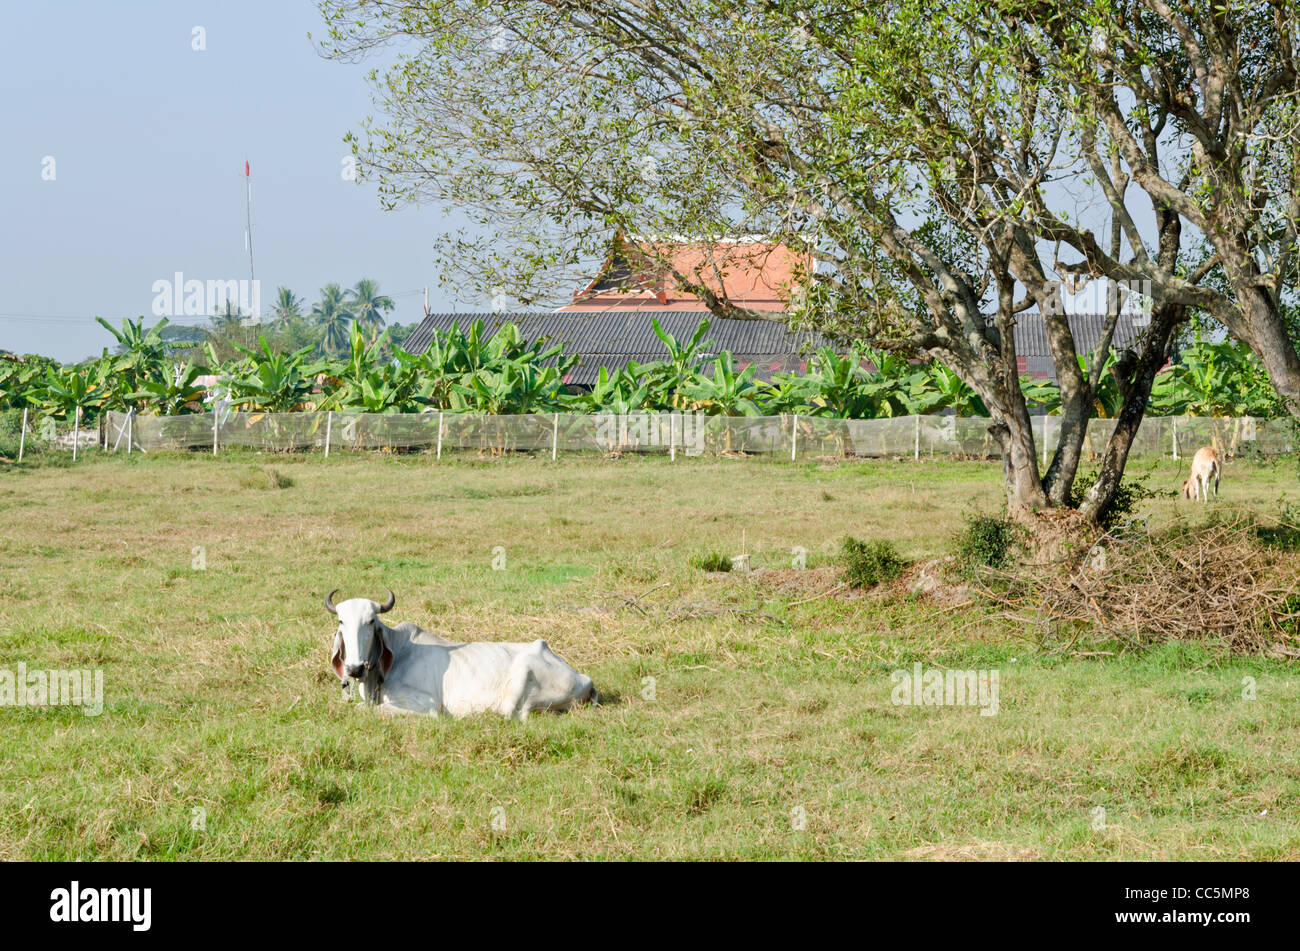 A large white Brahman cow with curved horns and large floppy ears sitting in a field looks at camera in northern Thailand Stock Photo